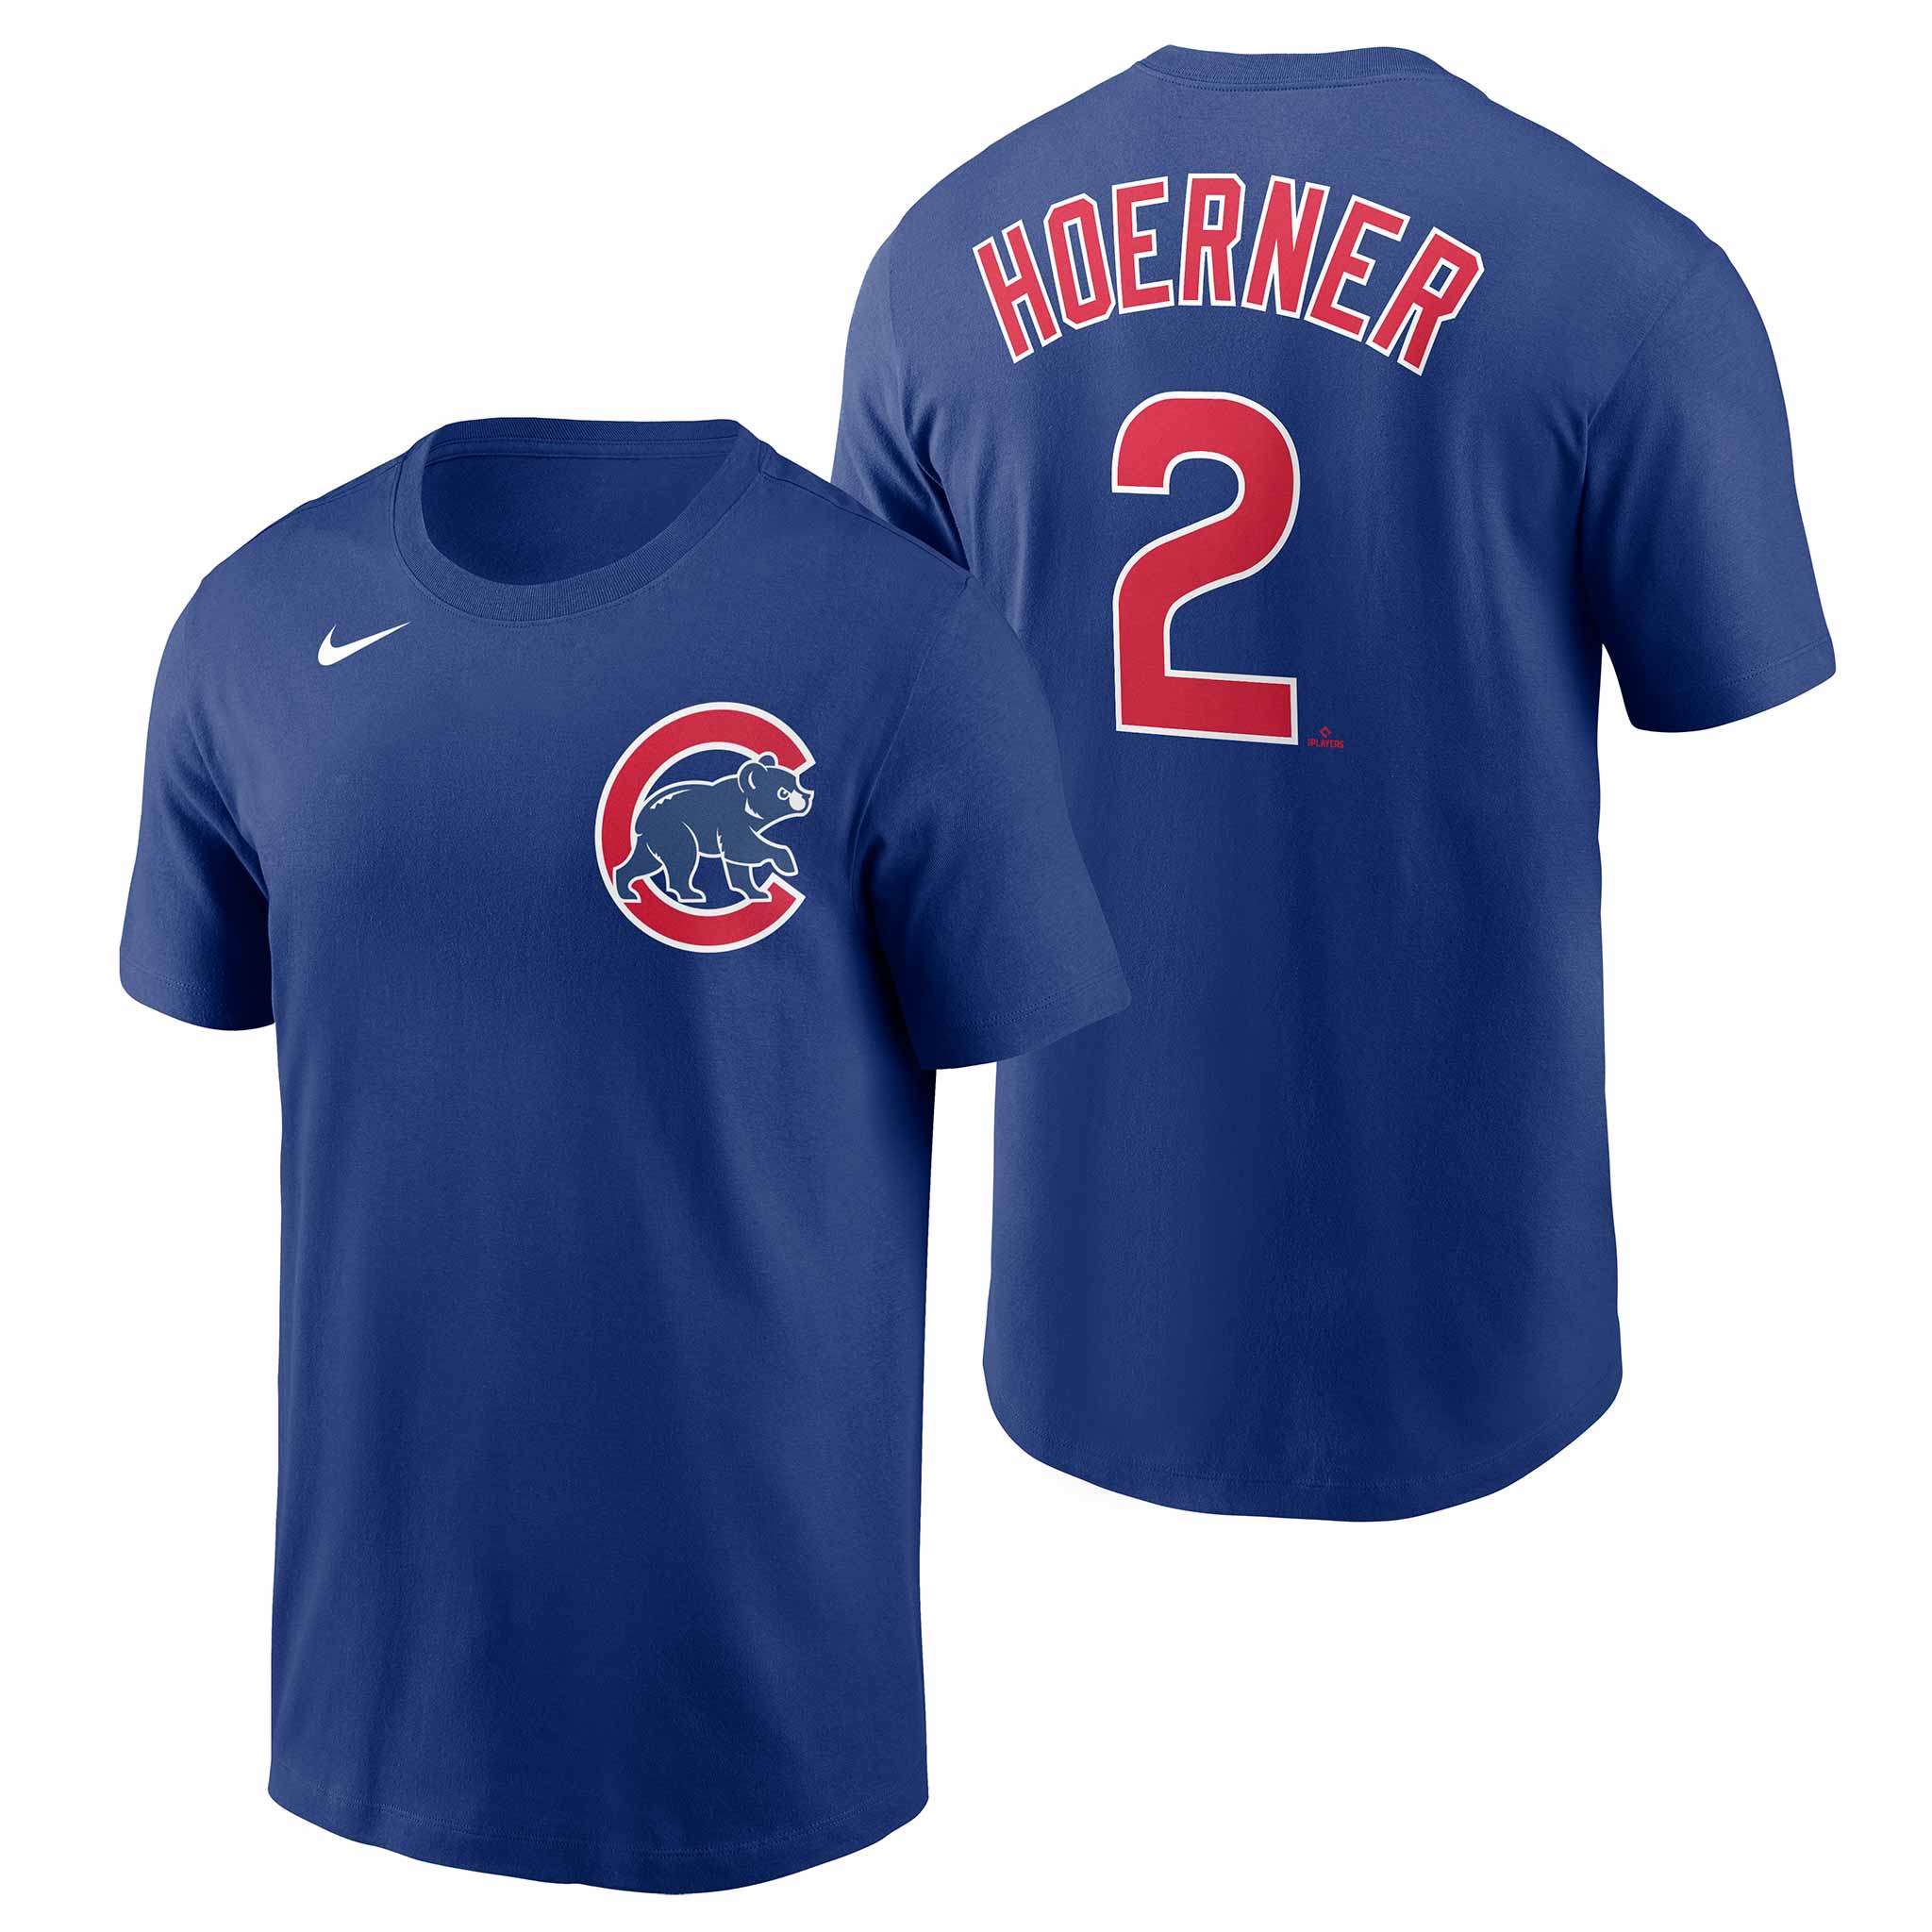 Chicago Cubs Women's Plus Size Sanitized Replica Team Jersey - White